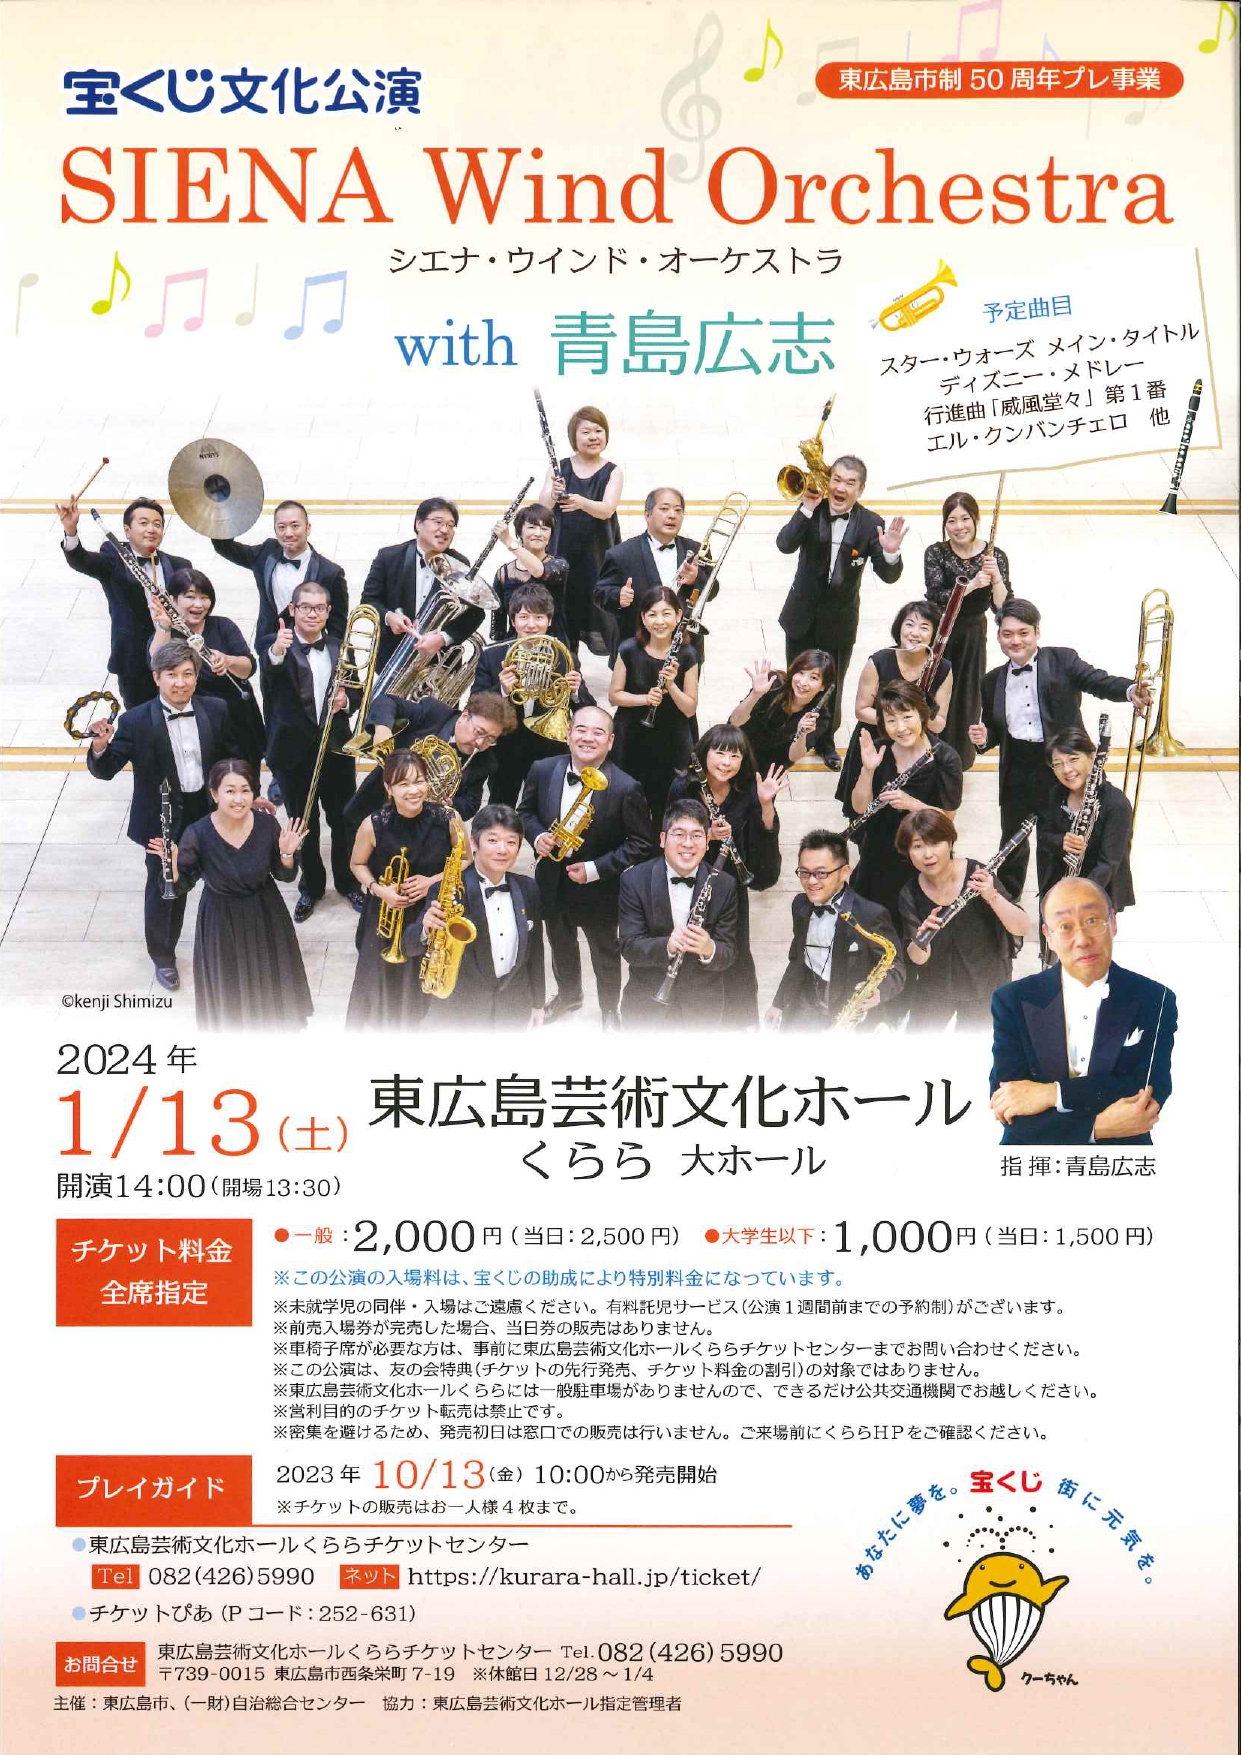 SIENA Wind Orchestra with 青島広志